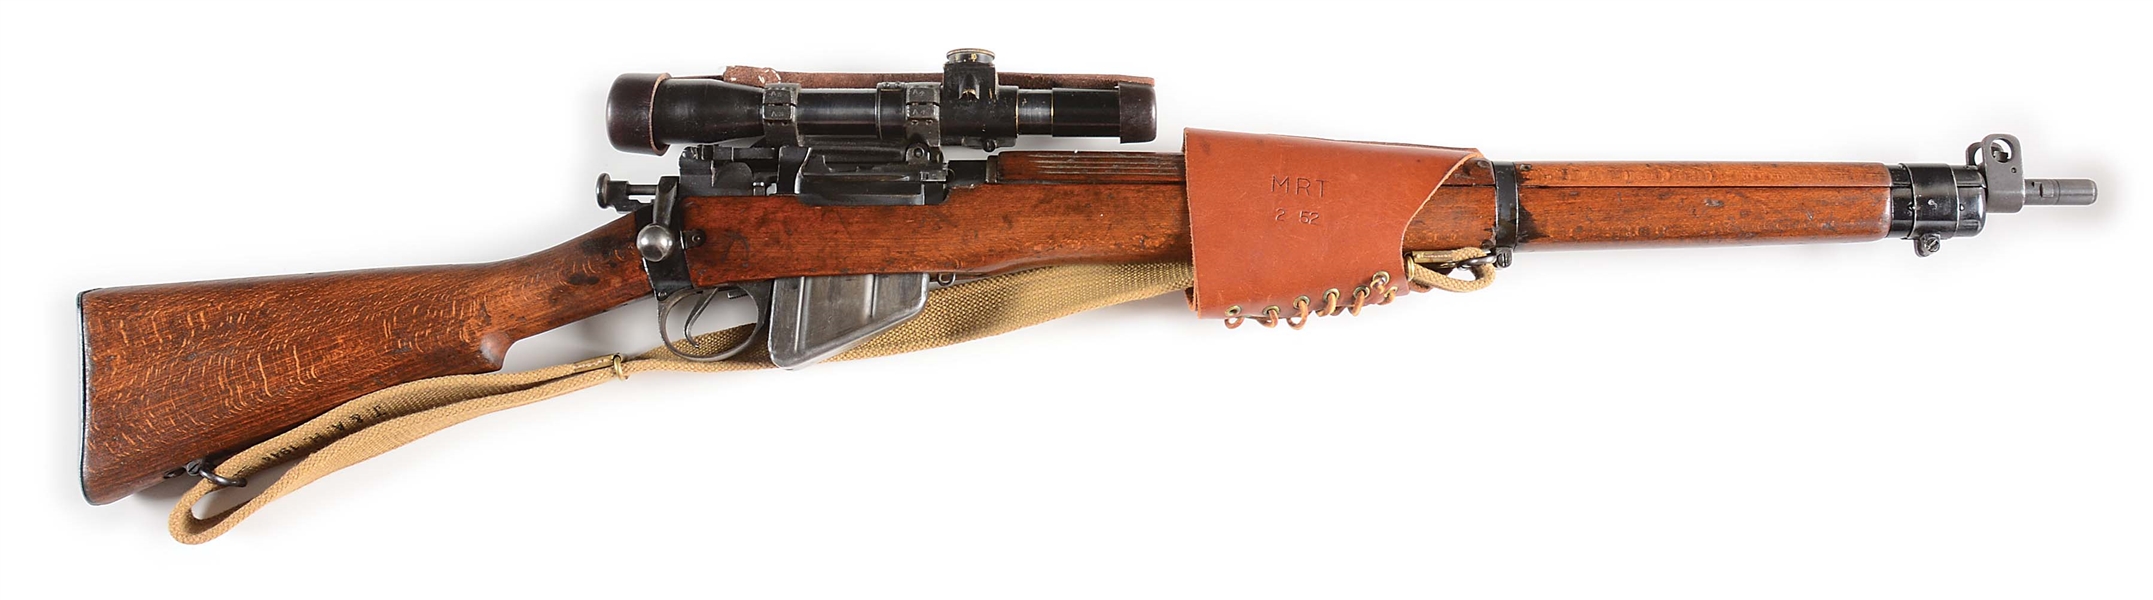 (C) ROYAL ORDNANCE FACTORY AT MALTBY PRODUCED LEE ENFIELD NO. 4 MARK I T SNIPER RIFLE, CONVERTED BY HOLLAND AND HOLLAND.